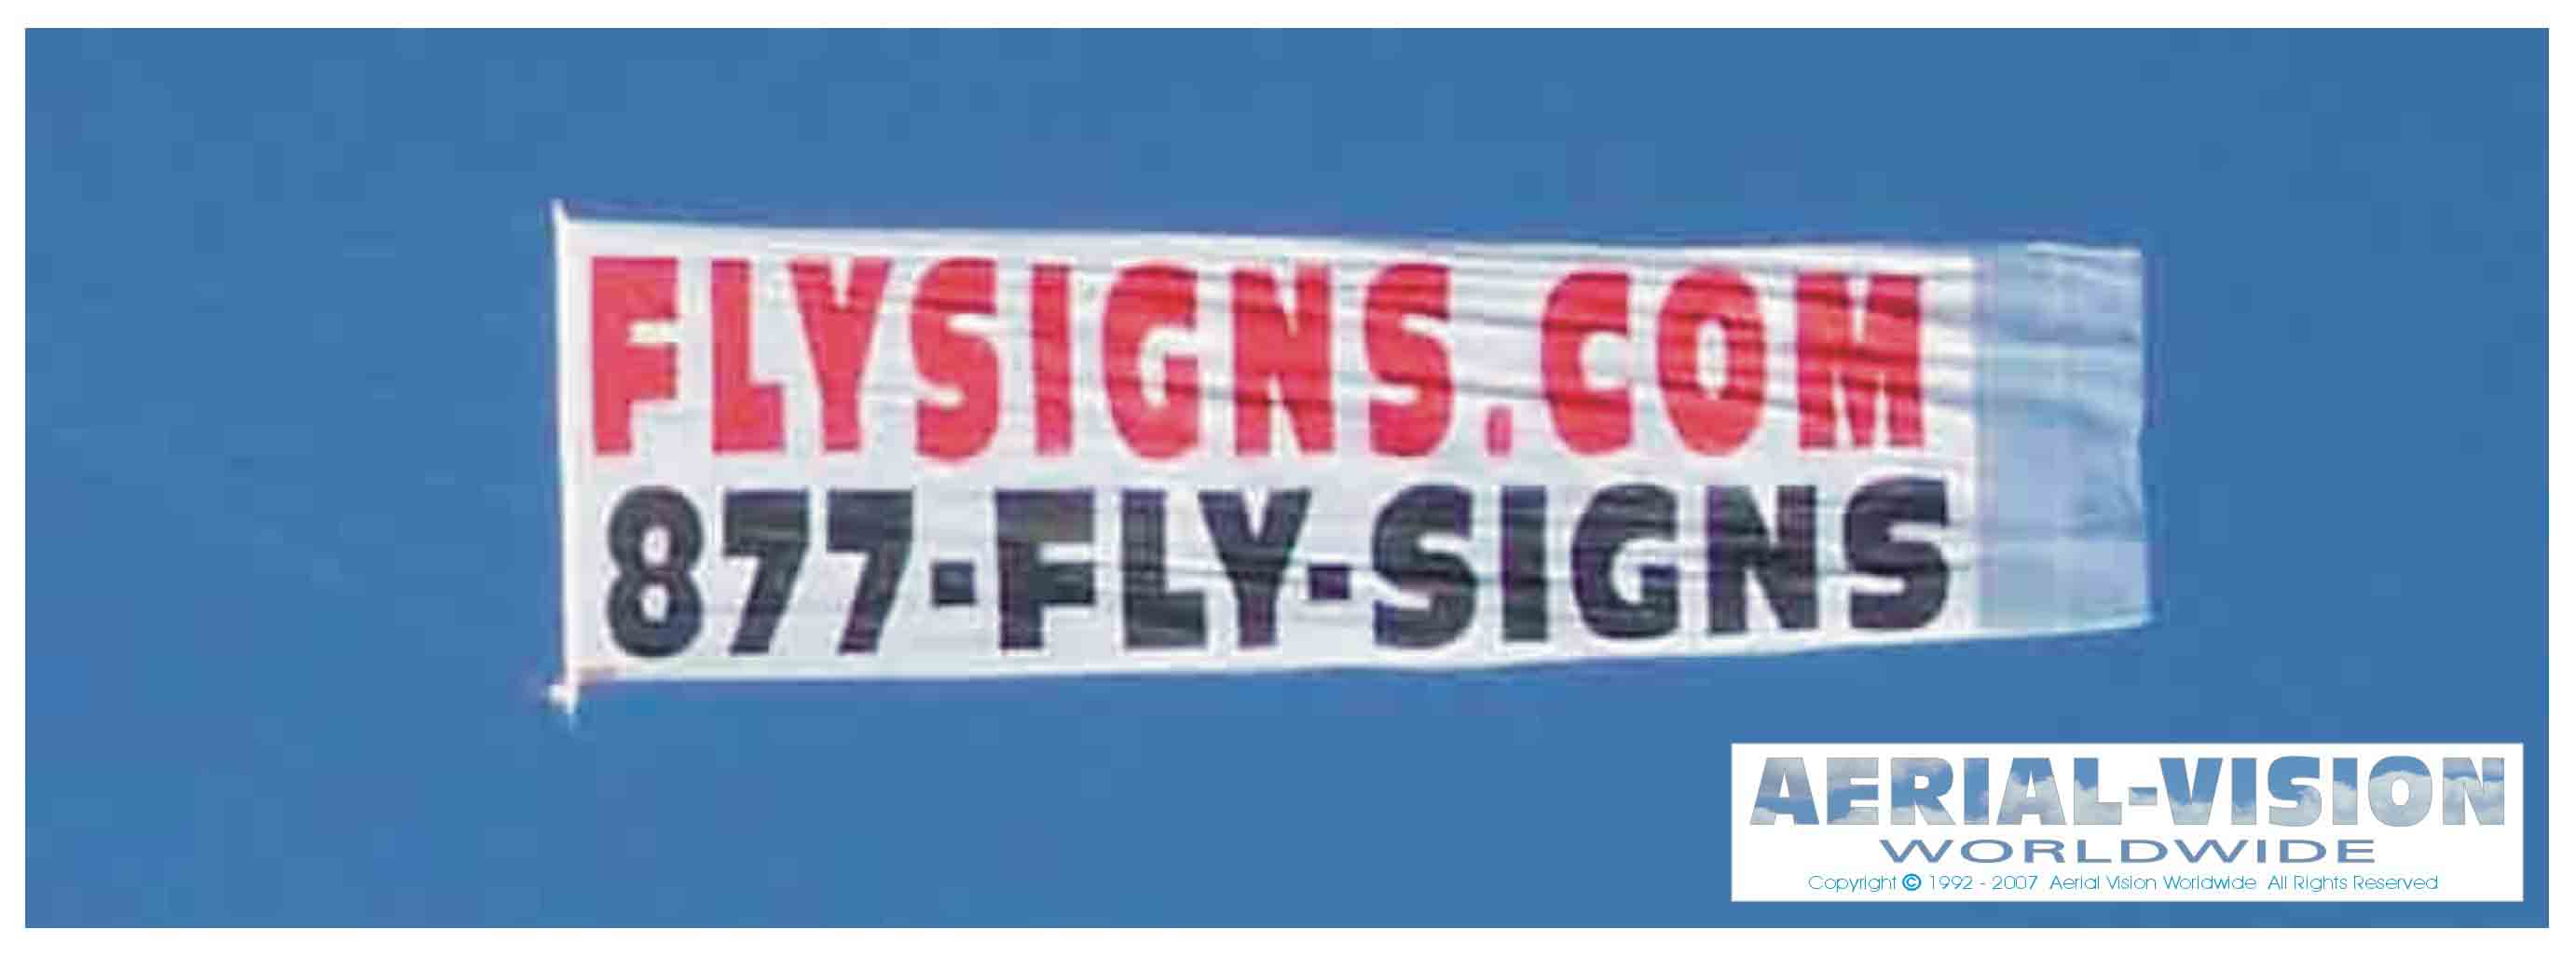 Advertising Plane Banners